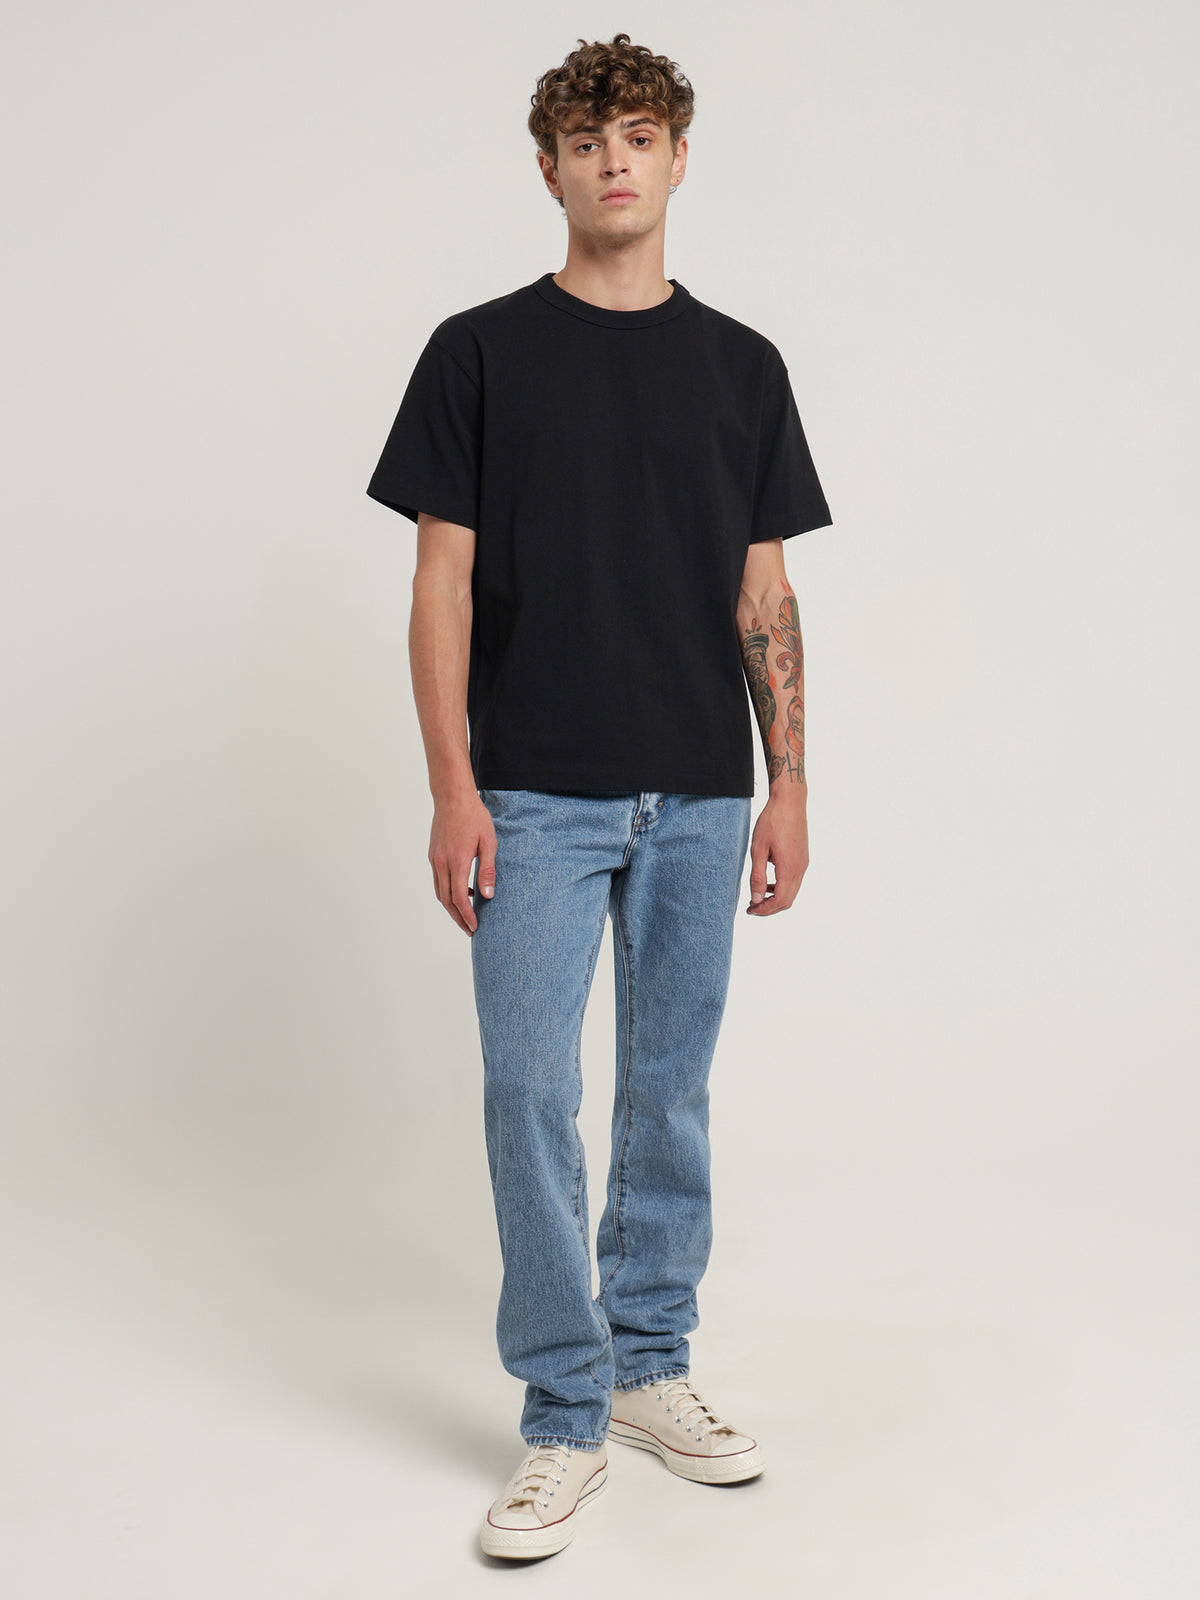 A 90s Relaxed Jeans in Death Disco Blue